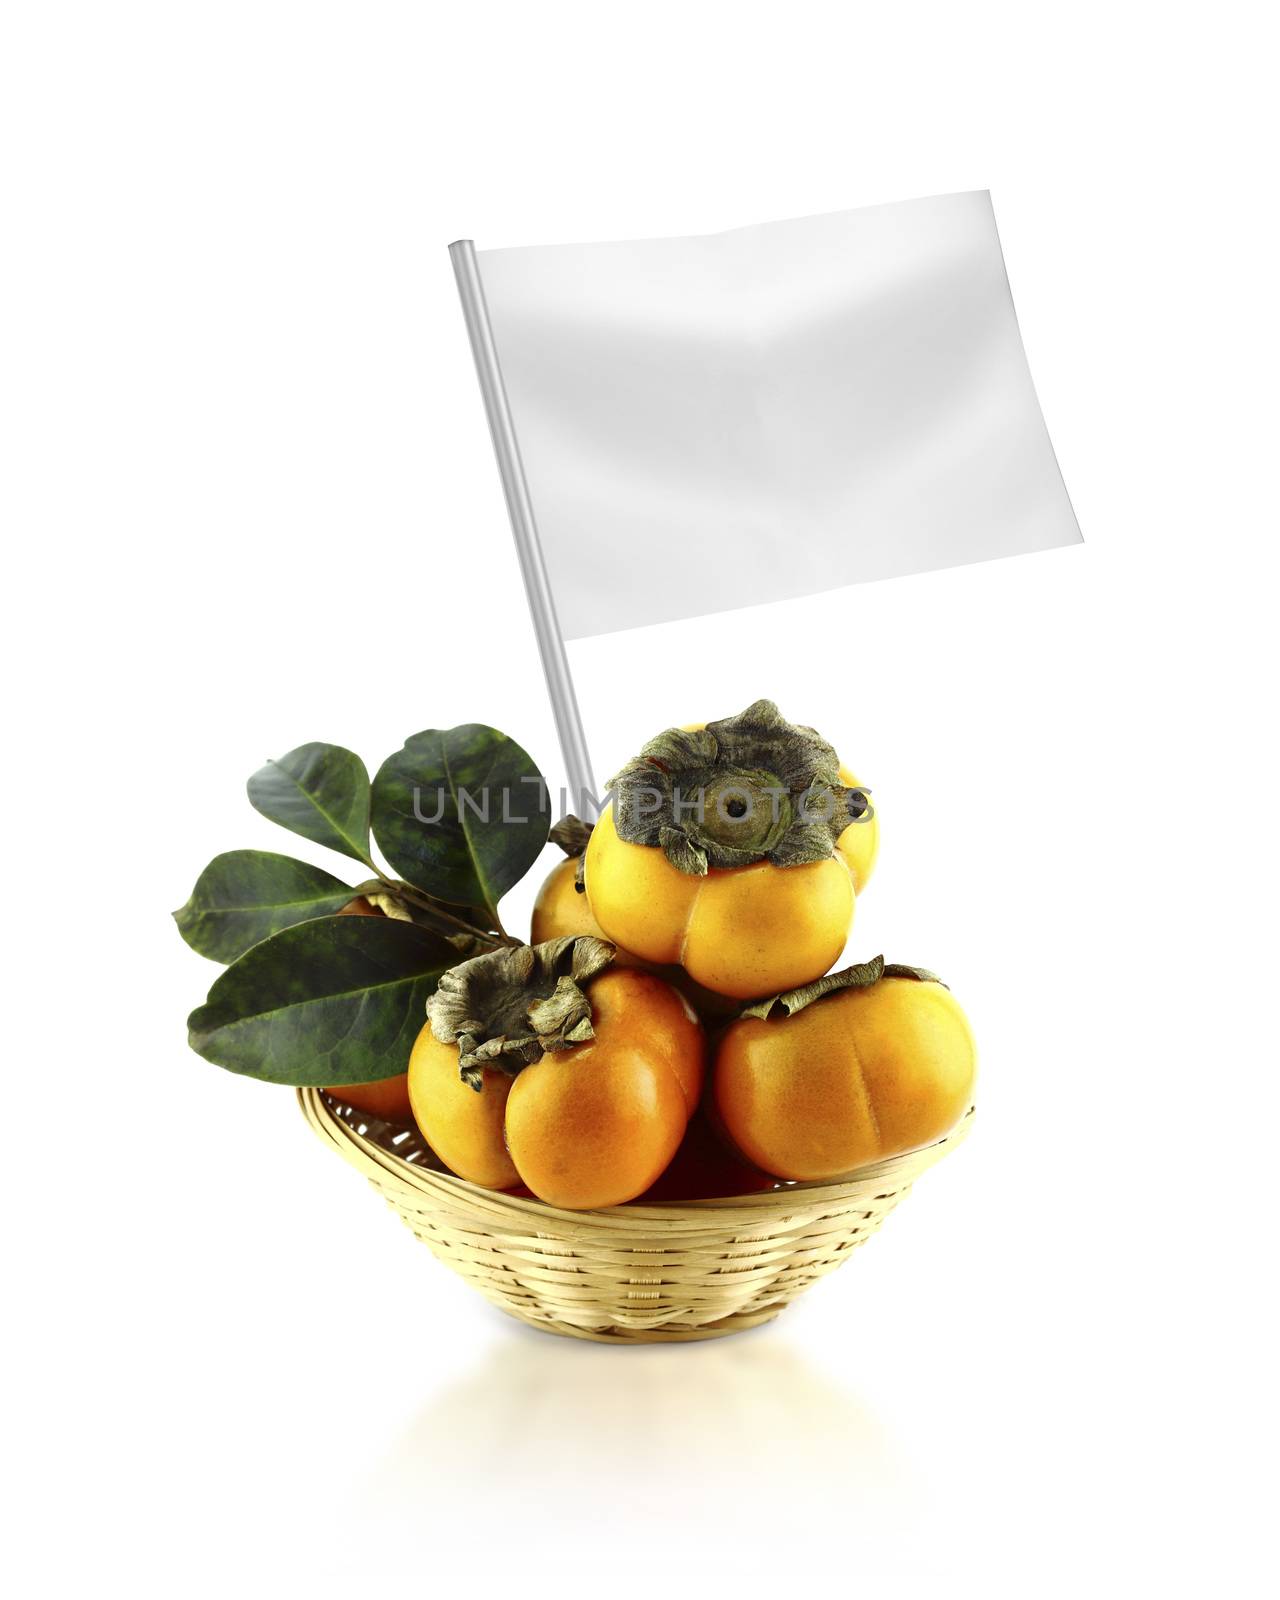 Healthy and organic food concept. Fresh persimmon with flag showing the benefits or the price of fruits.